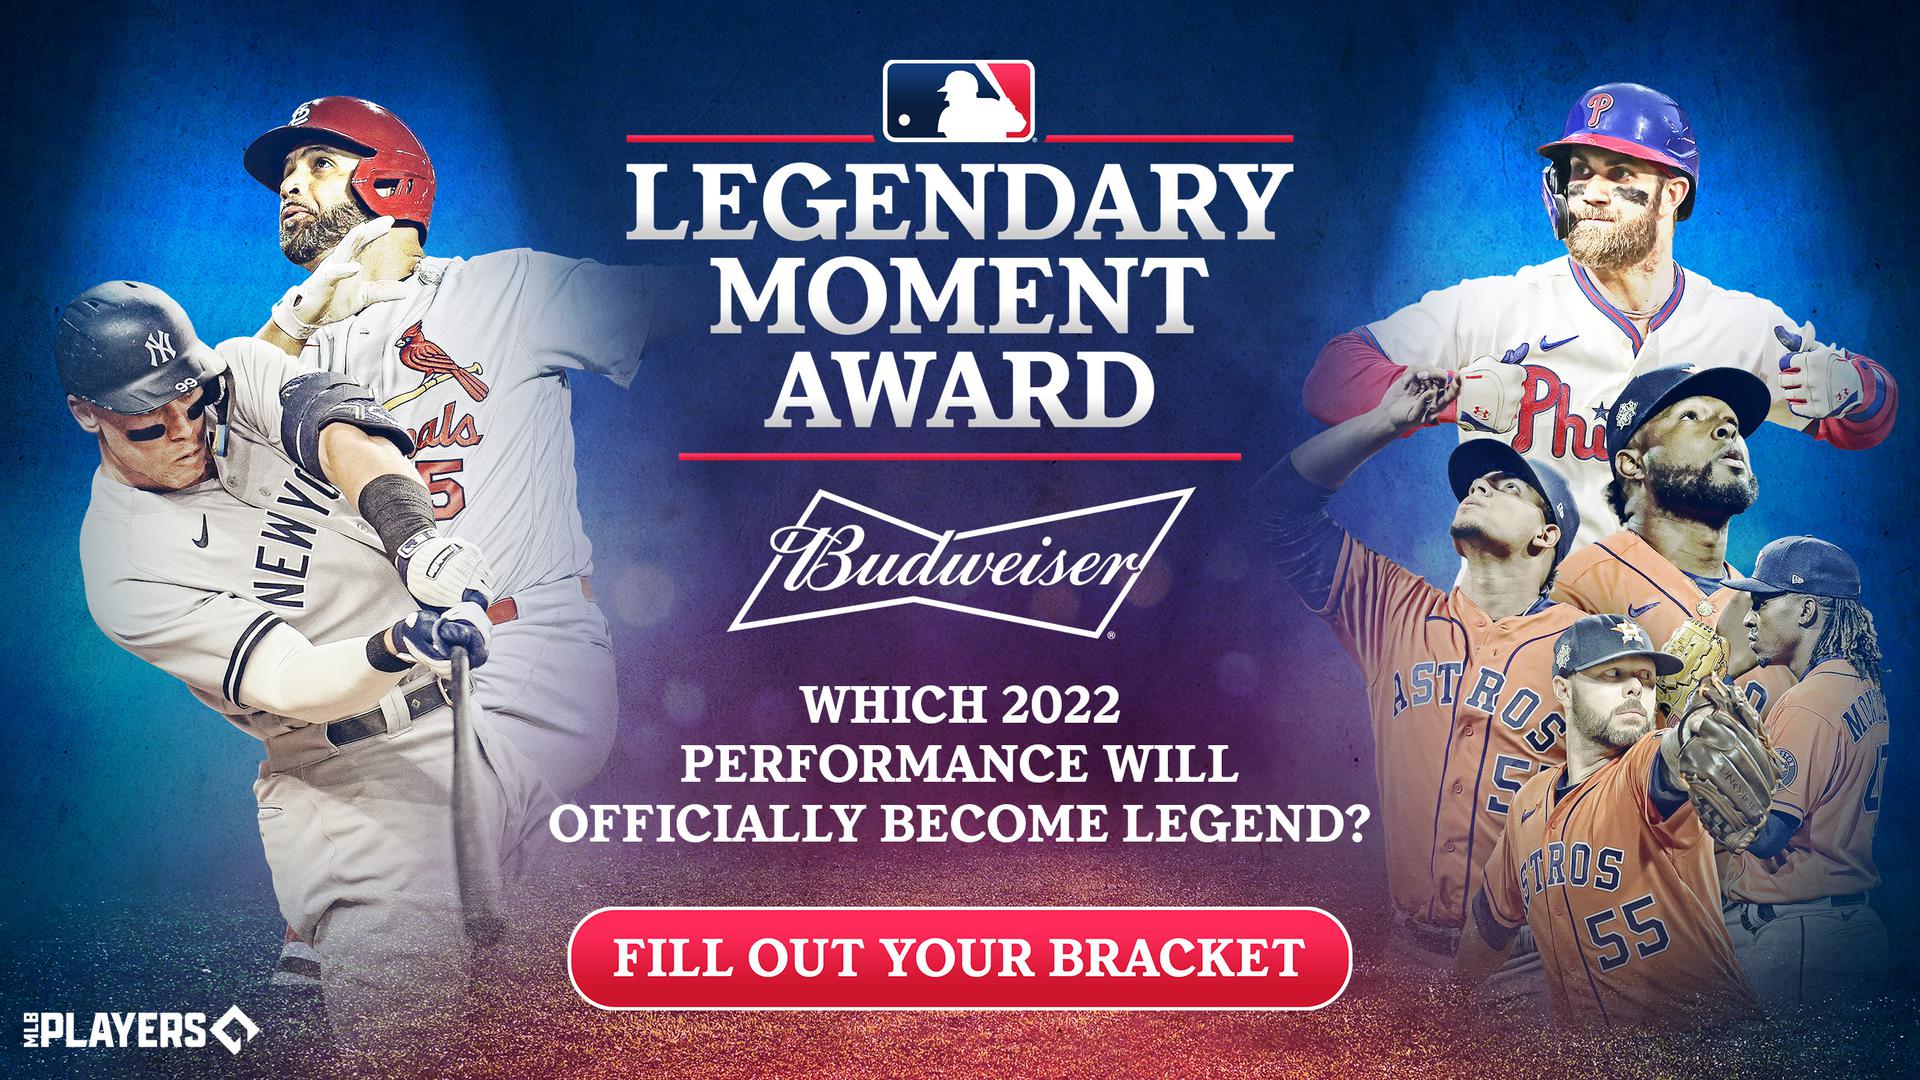 A designed image showing Aaron Judge, Albert Pujols, Bryce Harper and Astros pitchers flanking the words ''Legendary Moment Award''